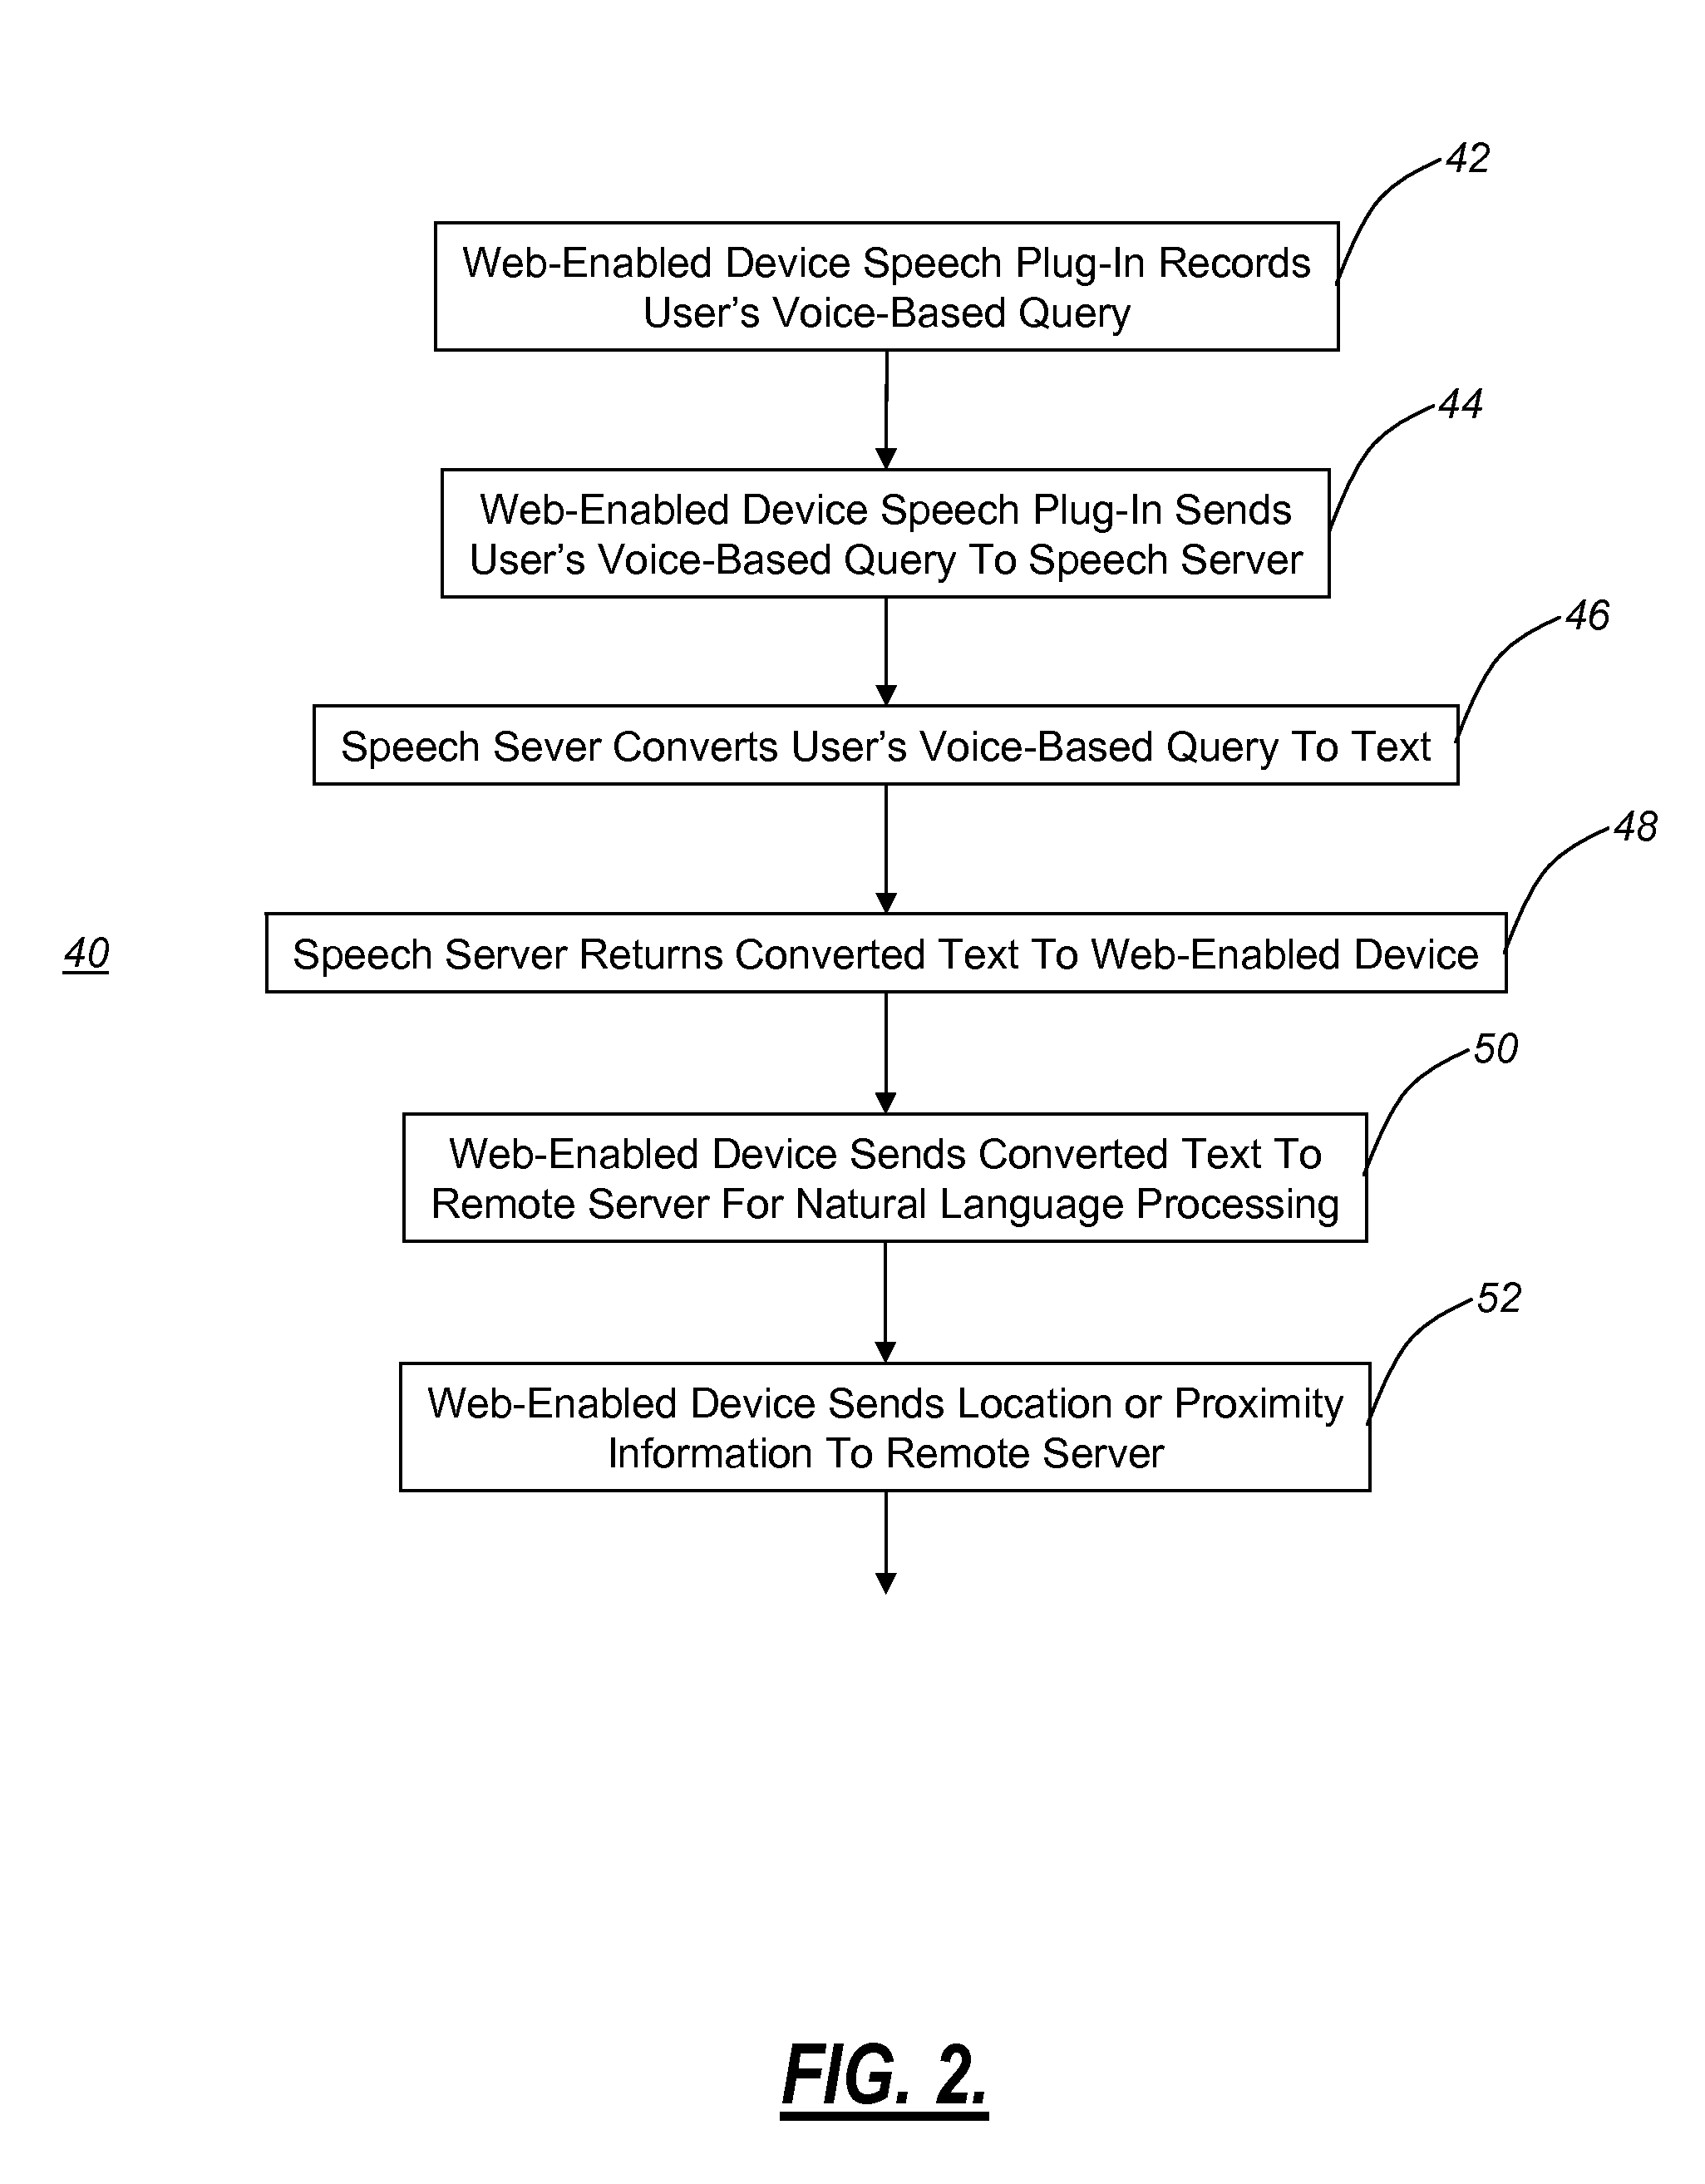 Multimodal natural language query system for processing and analyzing voice and proximity-based queries